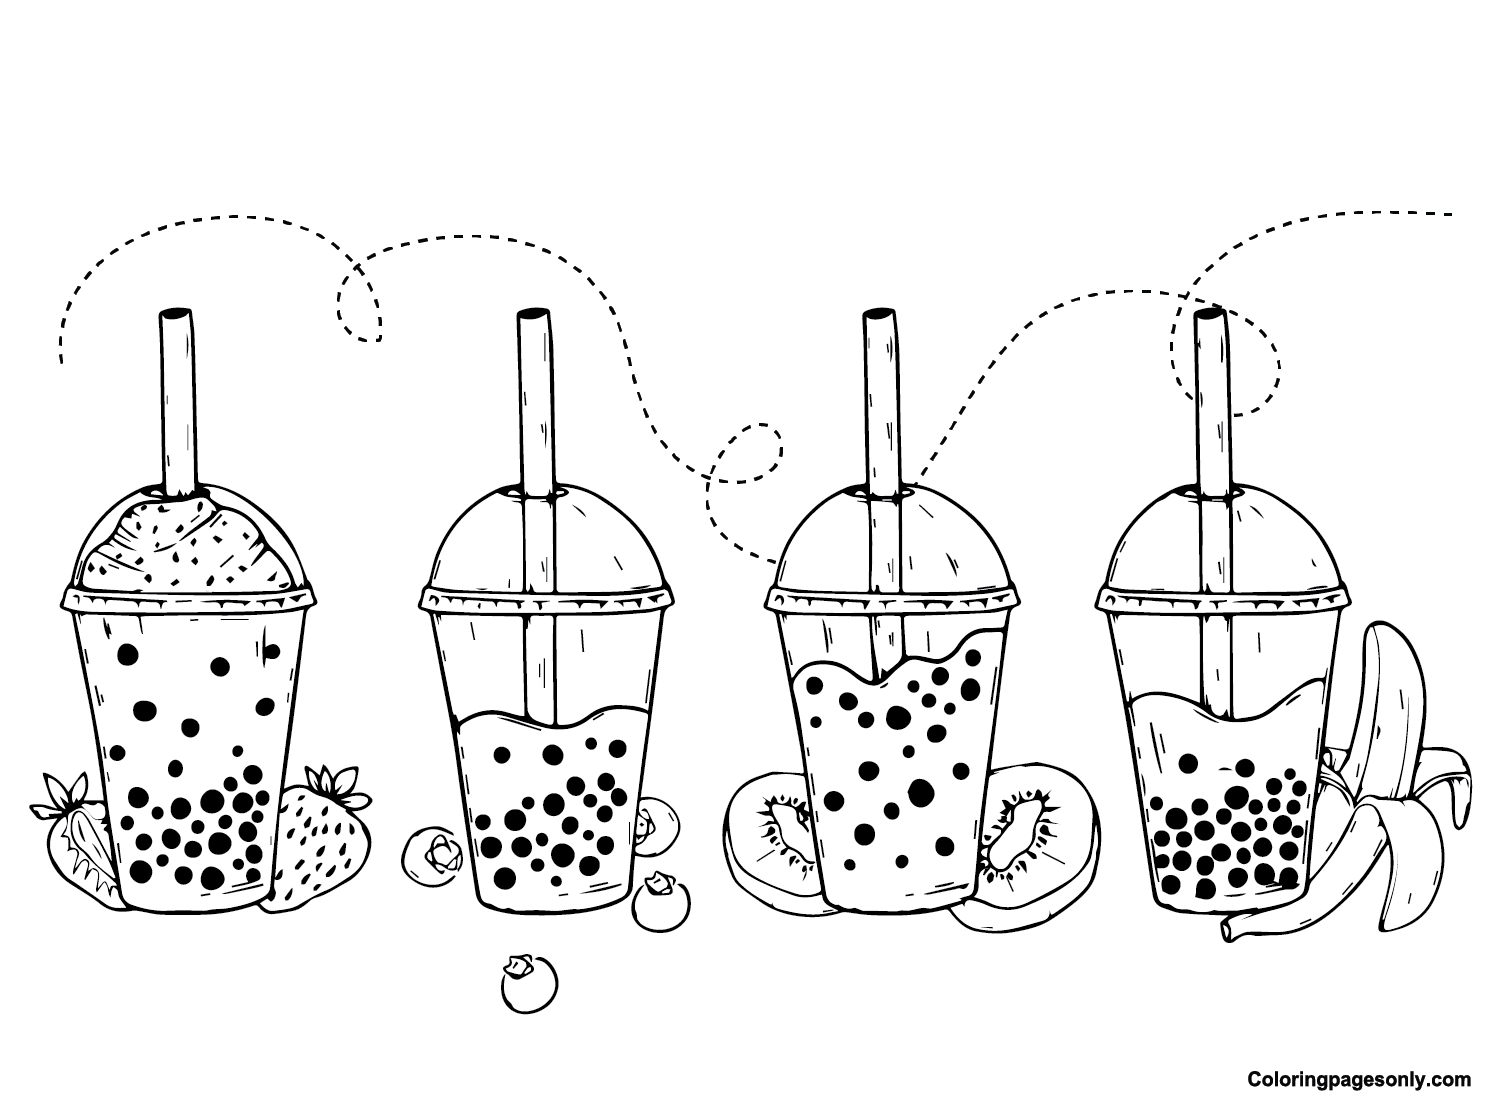 Boba Tea Coloring Pages Printable For Free Download 